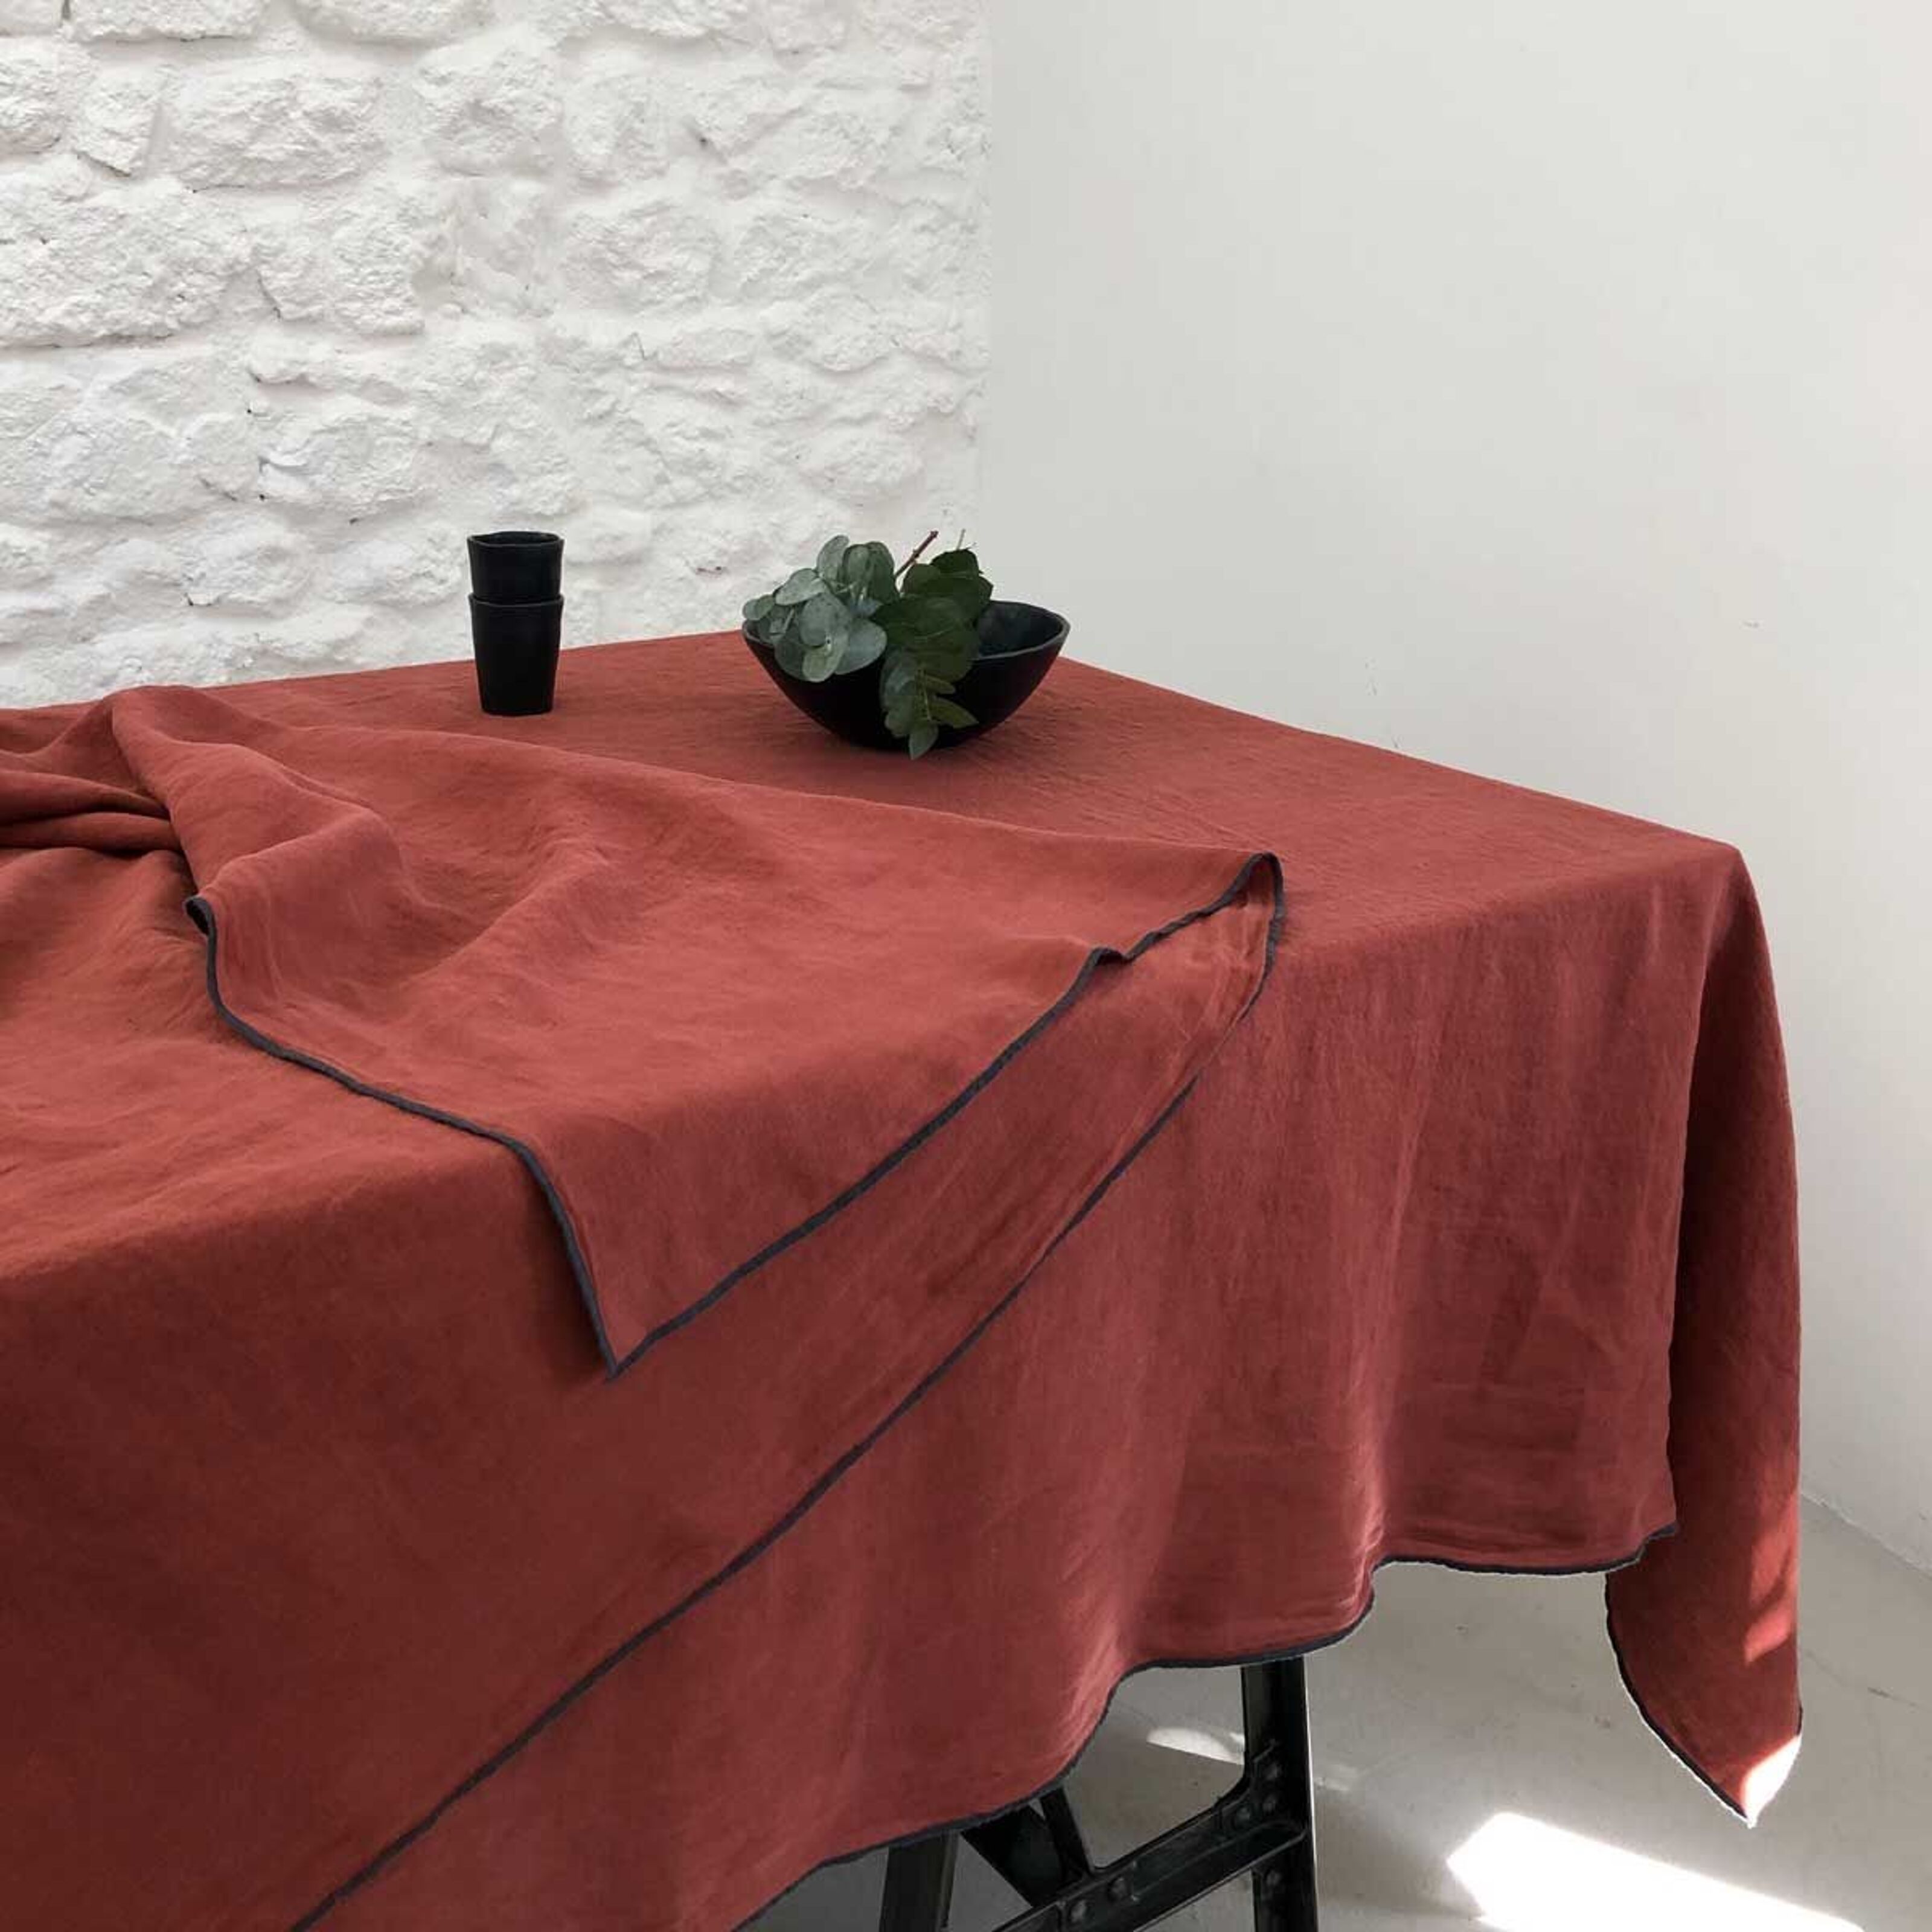 170x300cm washed Passage Vernet Buy terracotta wholesale - or curtain linen tablecloth overlock Oslo